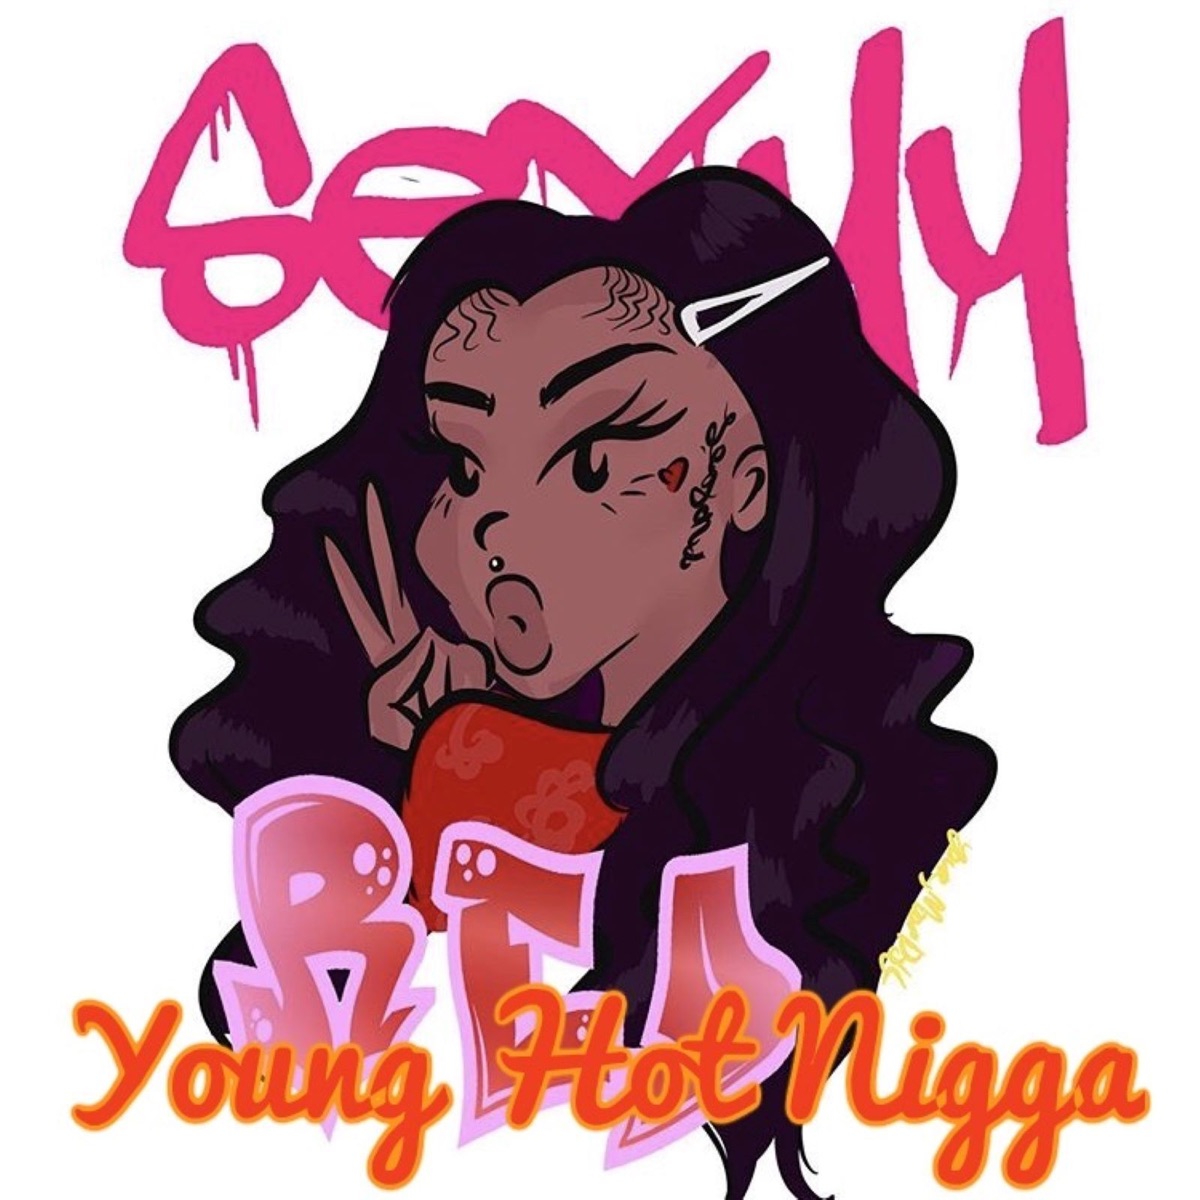 Sexyy Red - Young Hot Nigga